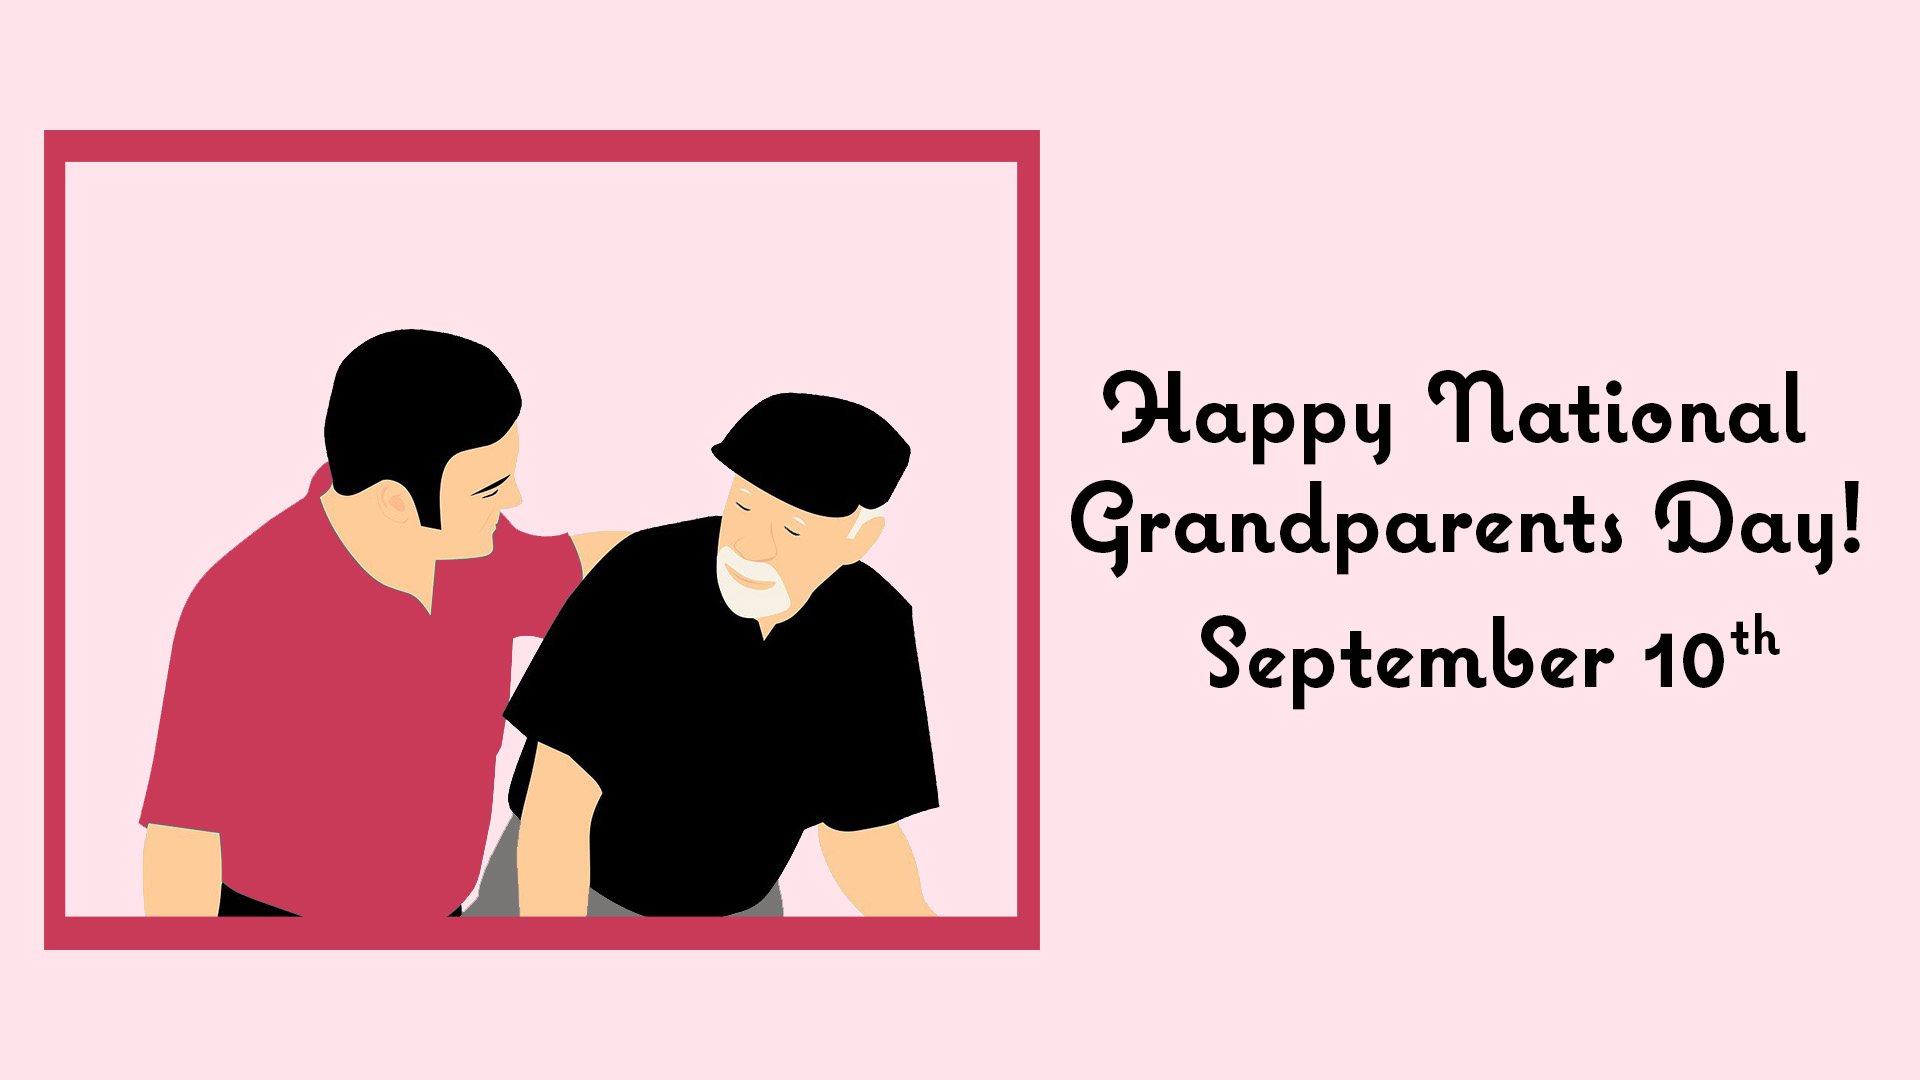 A light pink background. The right side reads Happy National Grandparents Day? September 10th in black decorative sans serif font. In a simple pink, red frame a man in a pink, red shirt has his left arm around and is looking at a grandpa. The grandpa looks back at the man. The grandpa is wearing a black hat and shirt.